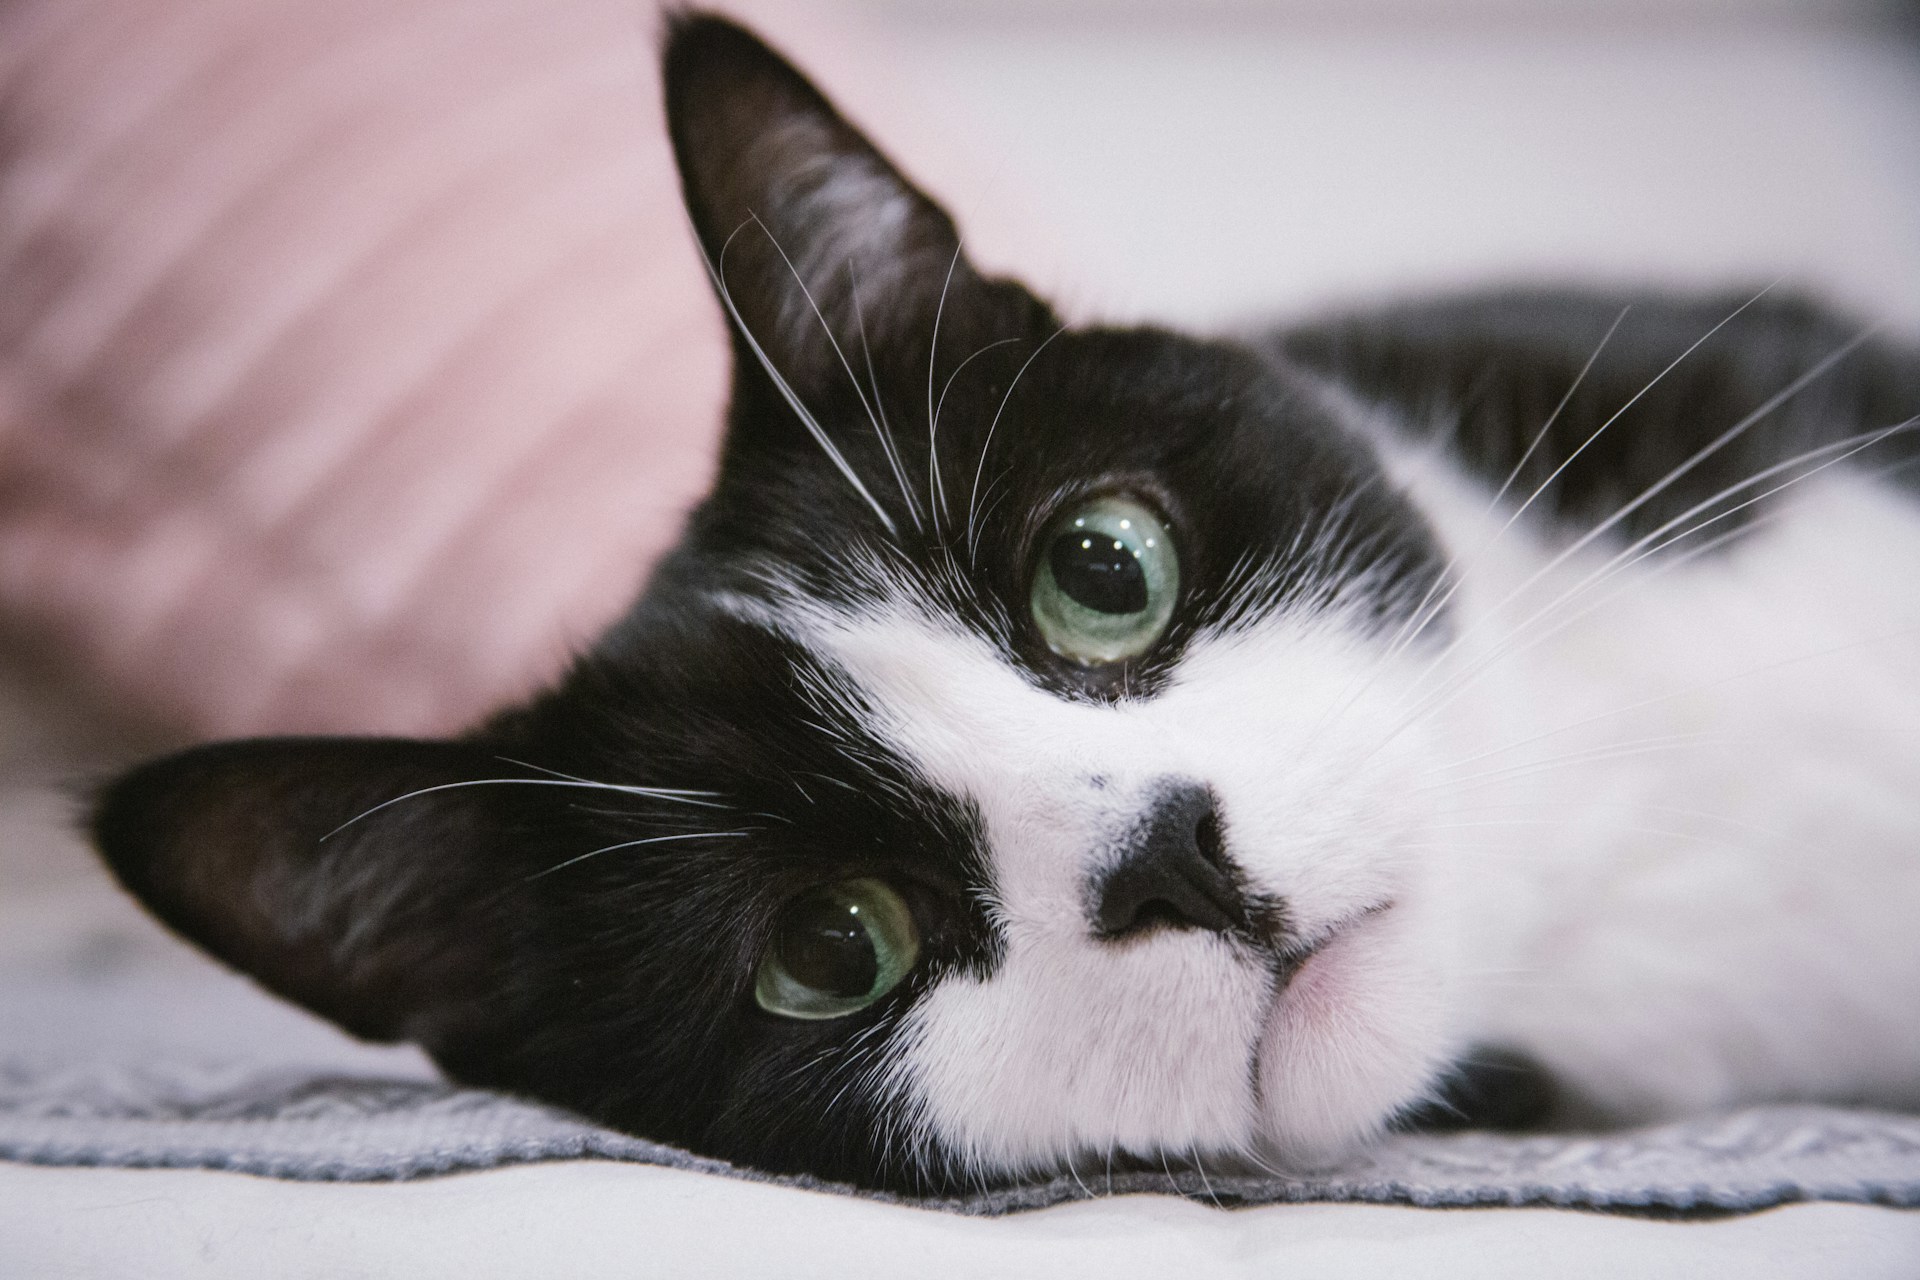 We explain how veterinarians diagnose and treat oral cysts in cats and dogs, and how to recognize the symptoms in your pet.